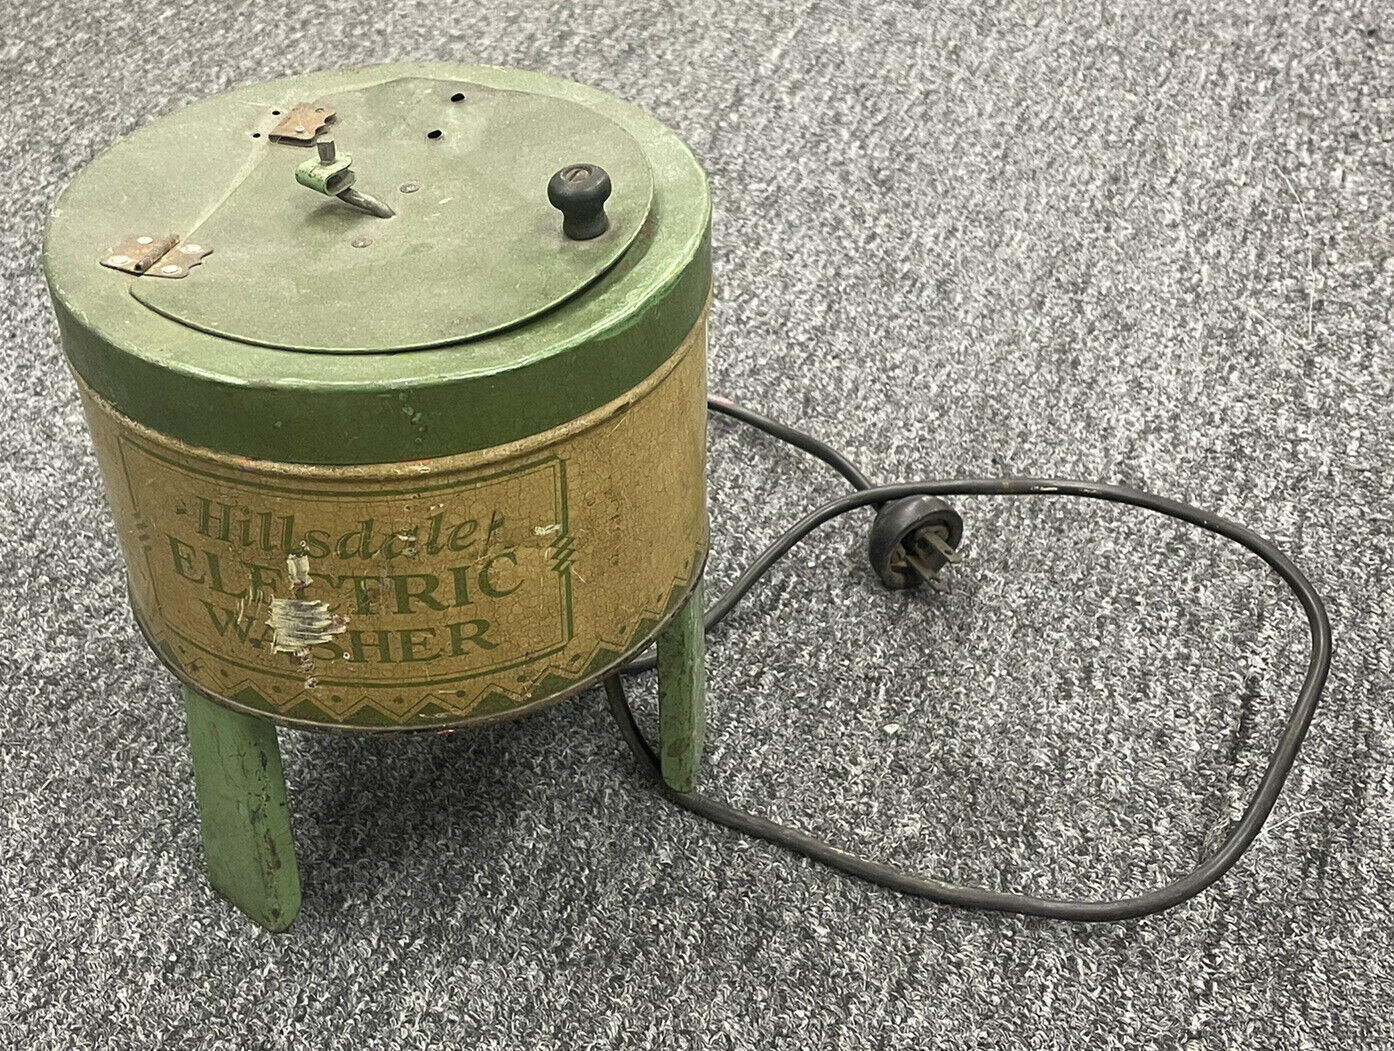 Hillsdale Electric Tin Green Washer